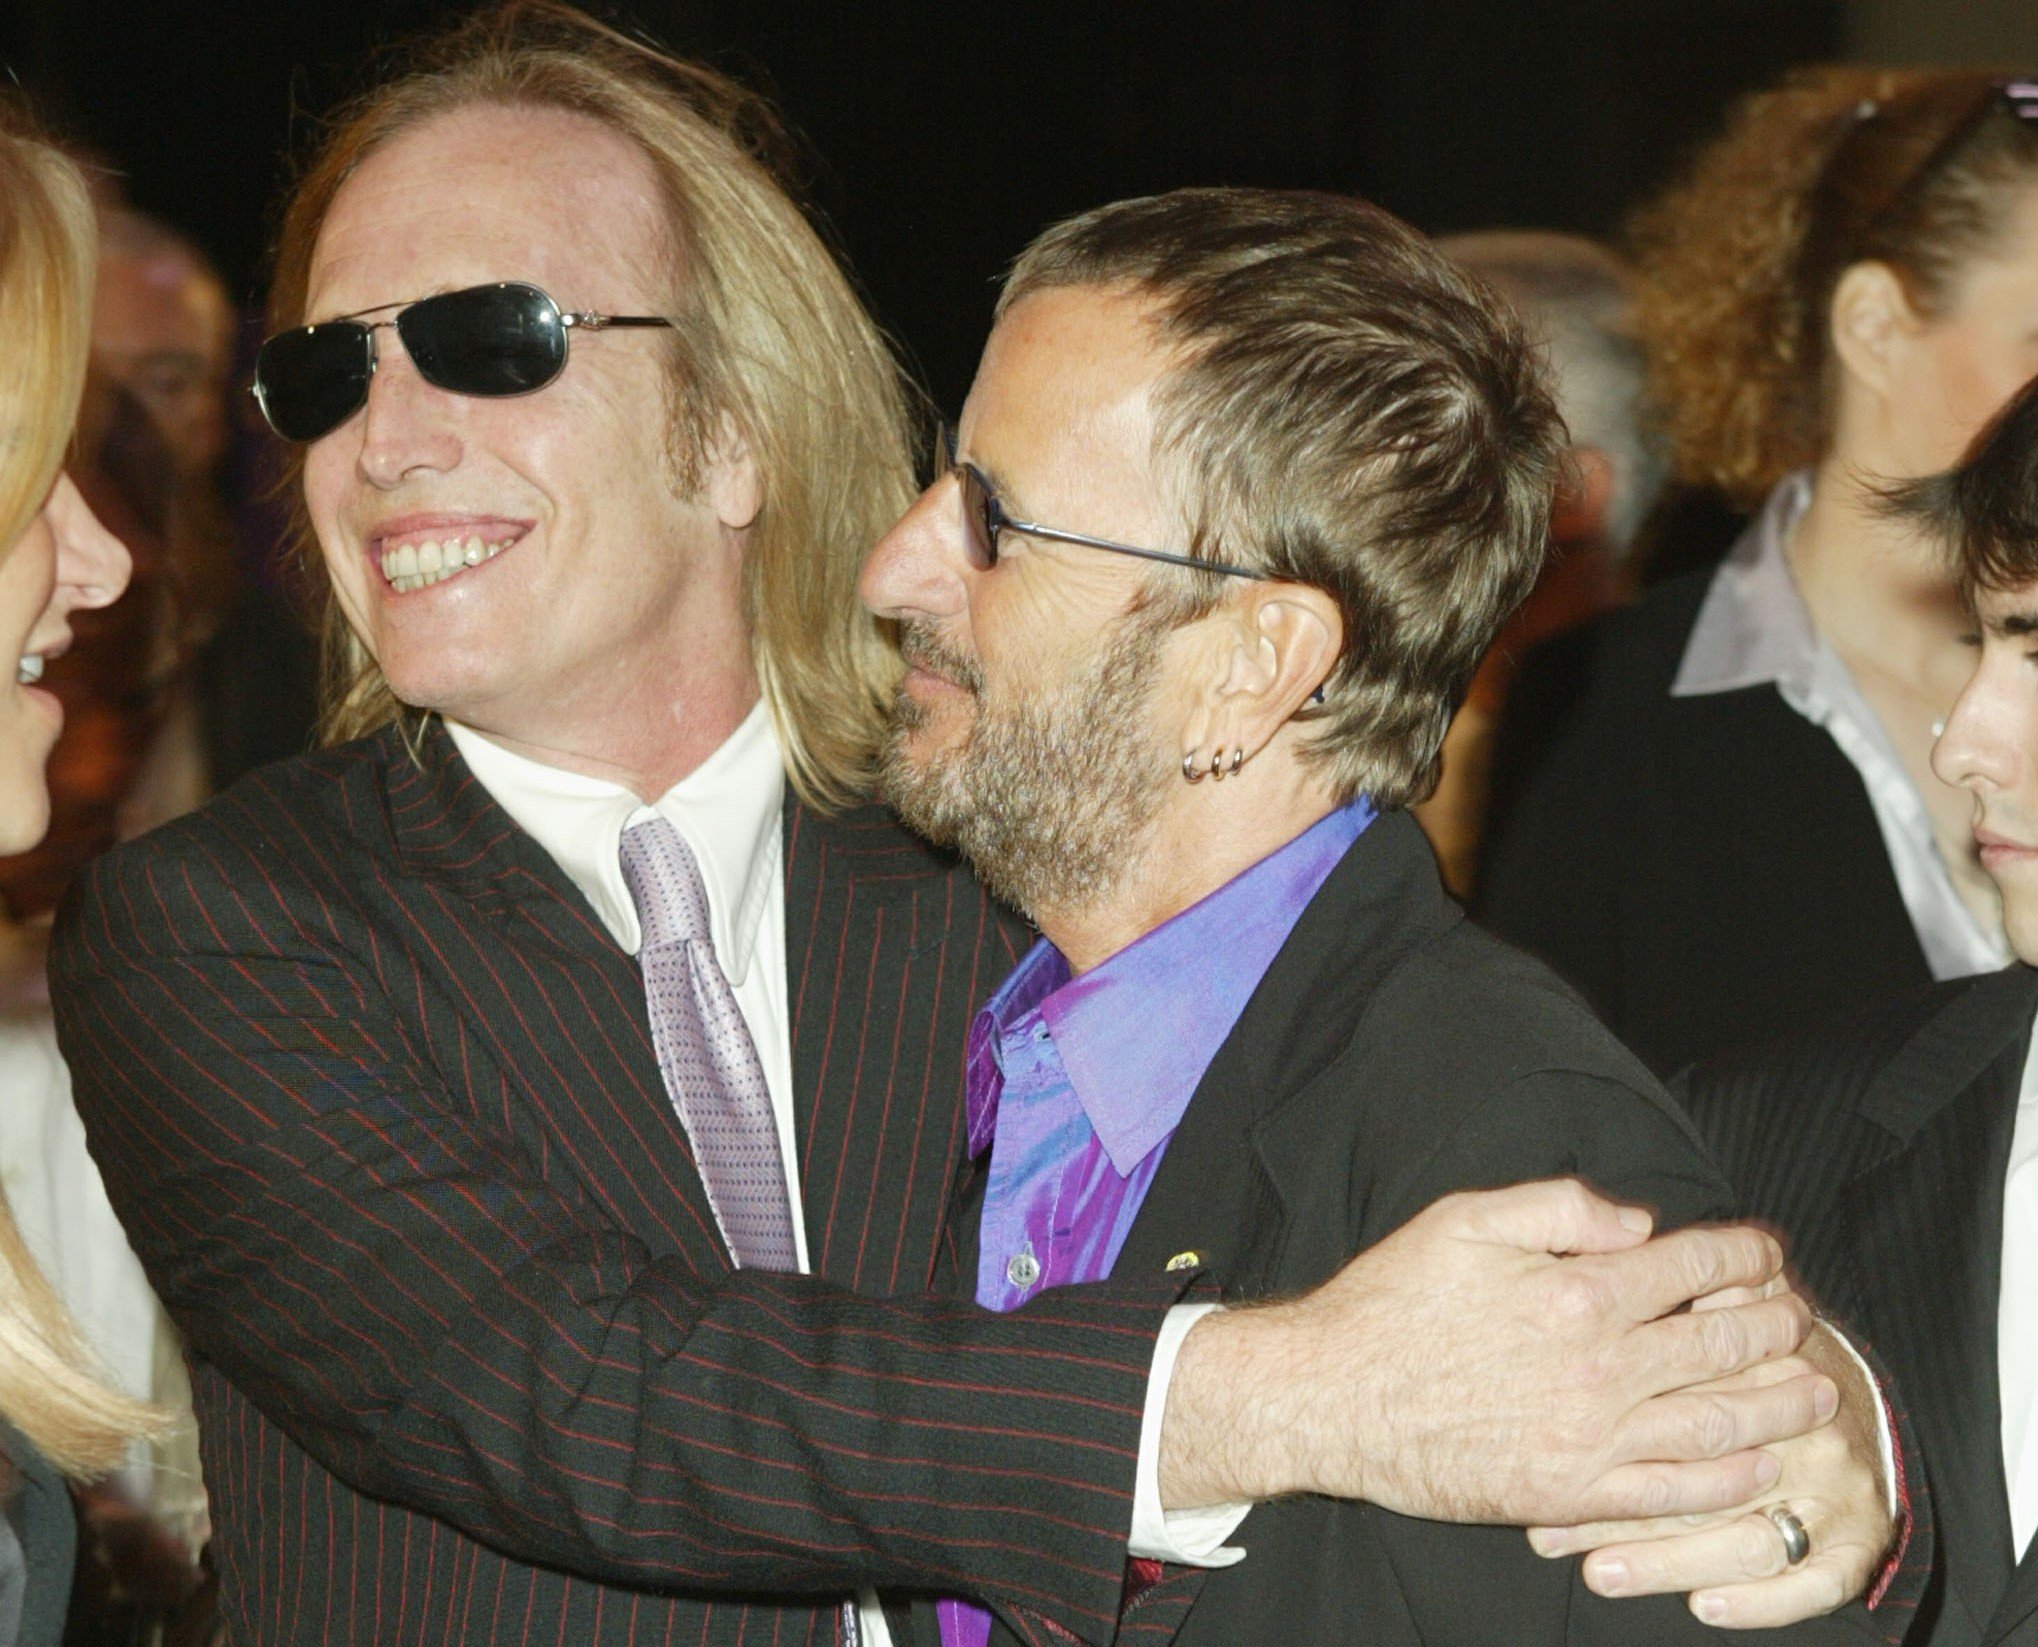 Tom Petty Said Ringo Starr Was an ‘Incredibly Creative Drummer’